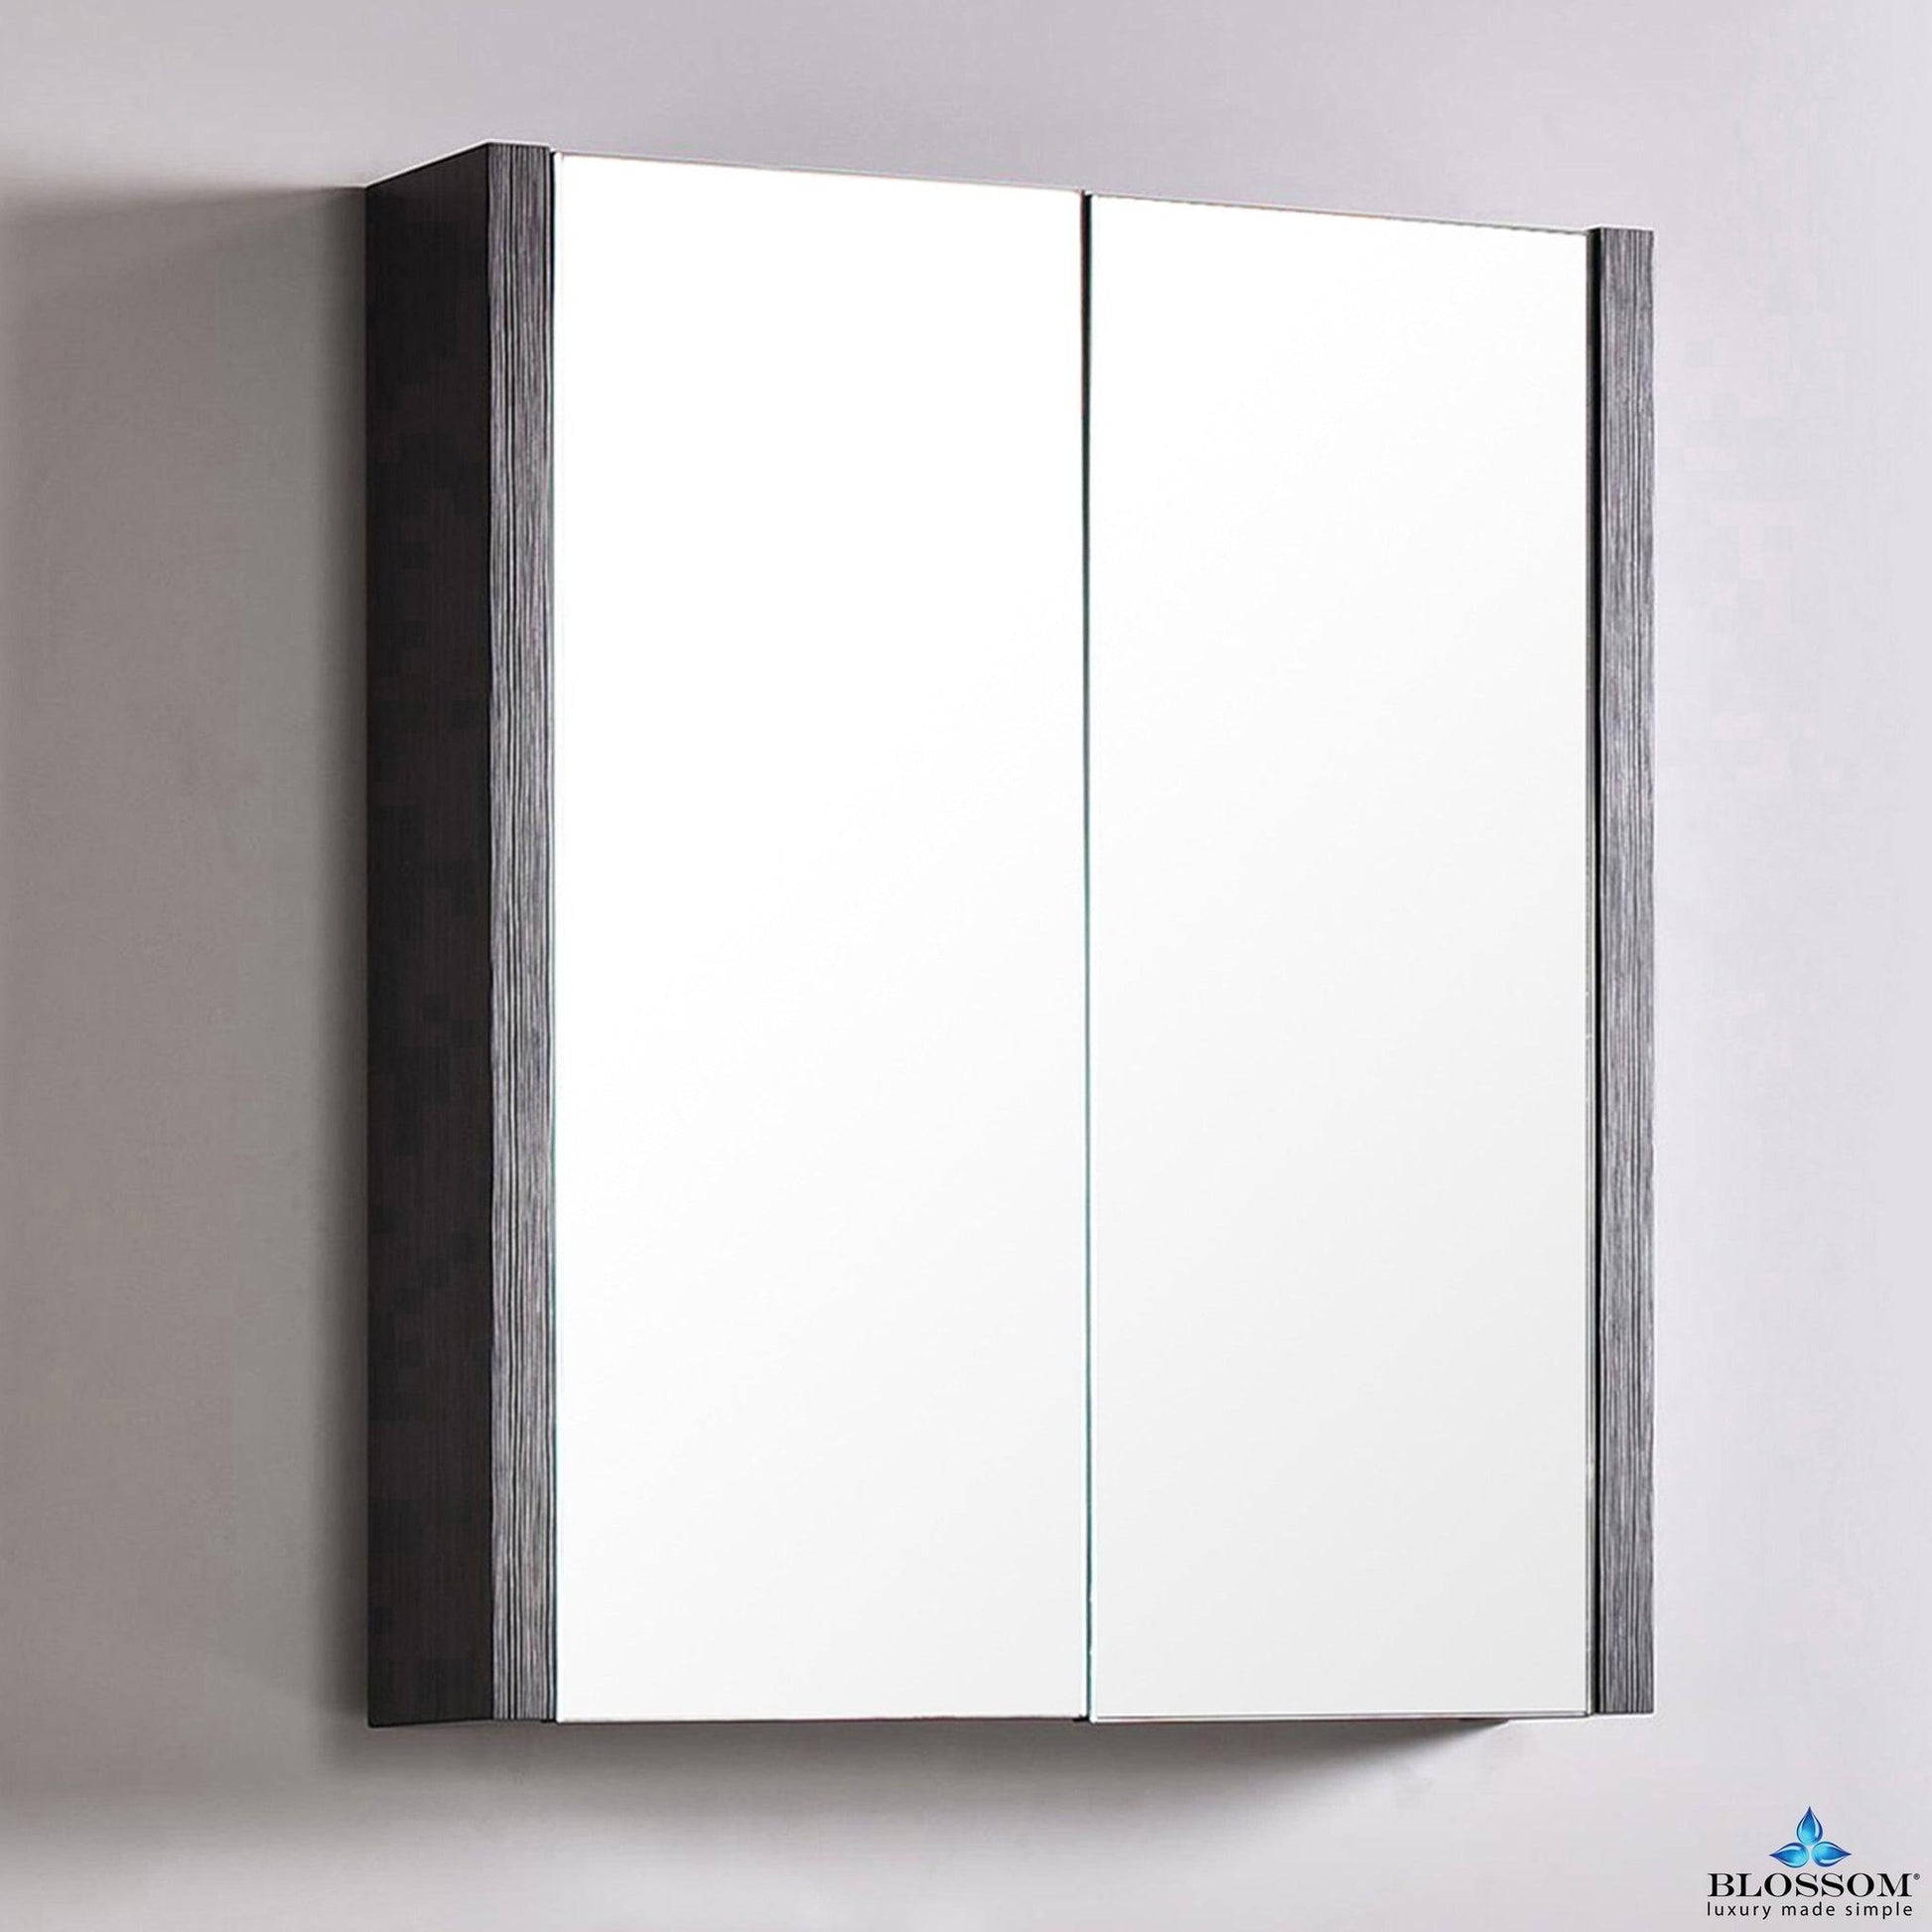 Blossom Milan 30" x 32" Silver Gray Recessed or Surface Mount 2-Door Mirror Medicine Cabinet With Adjustable Wood Shelves and Soft-Closing Hinges